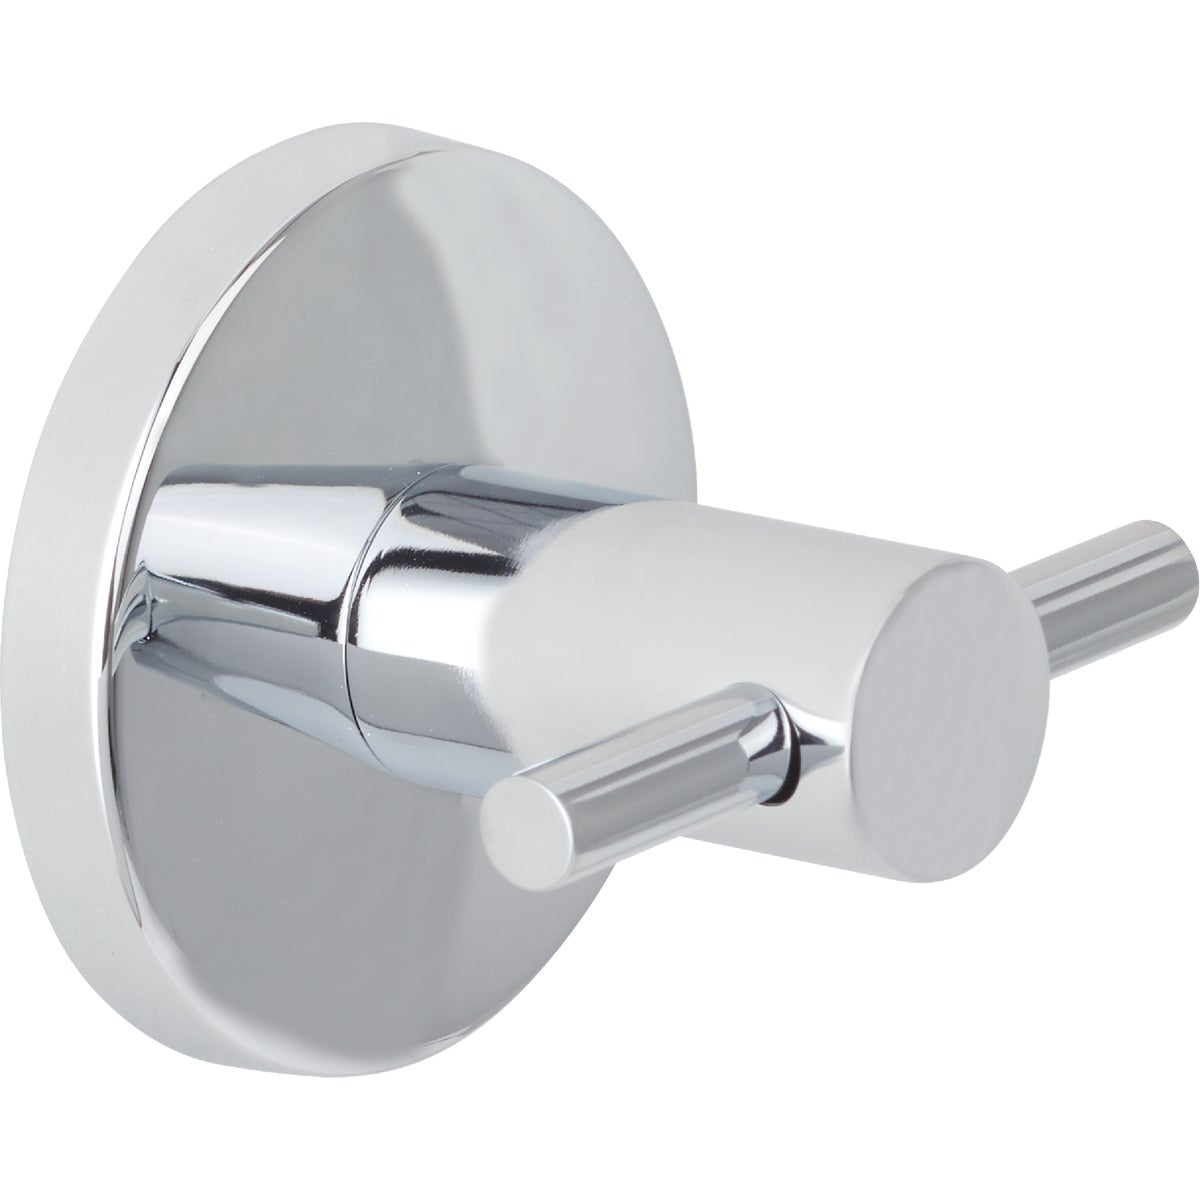 Home Impressions Trition Chrome Robe Hook